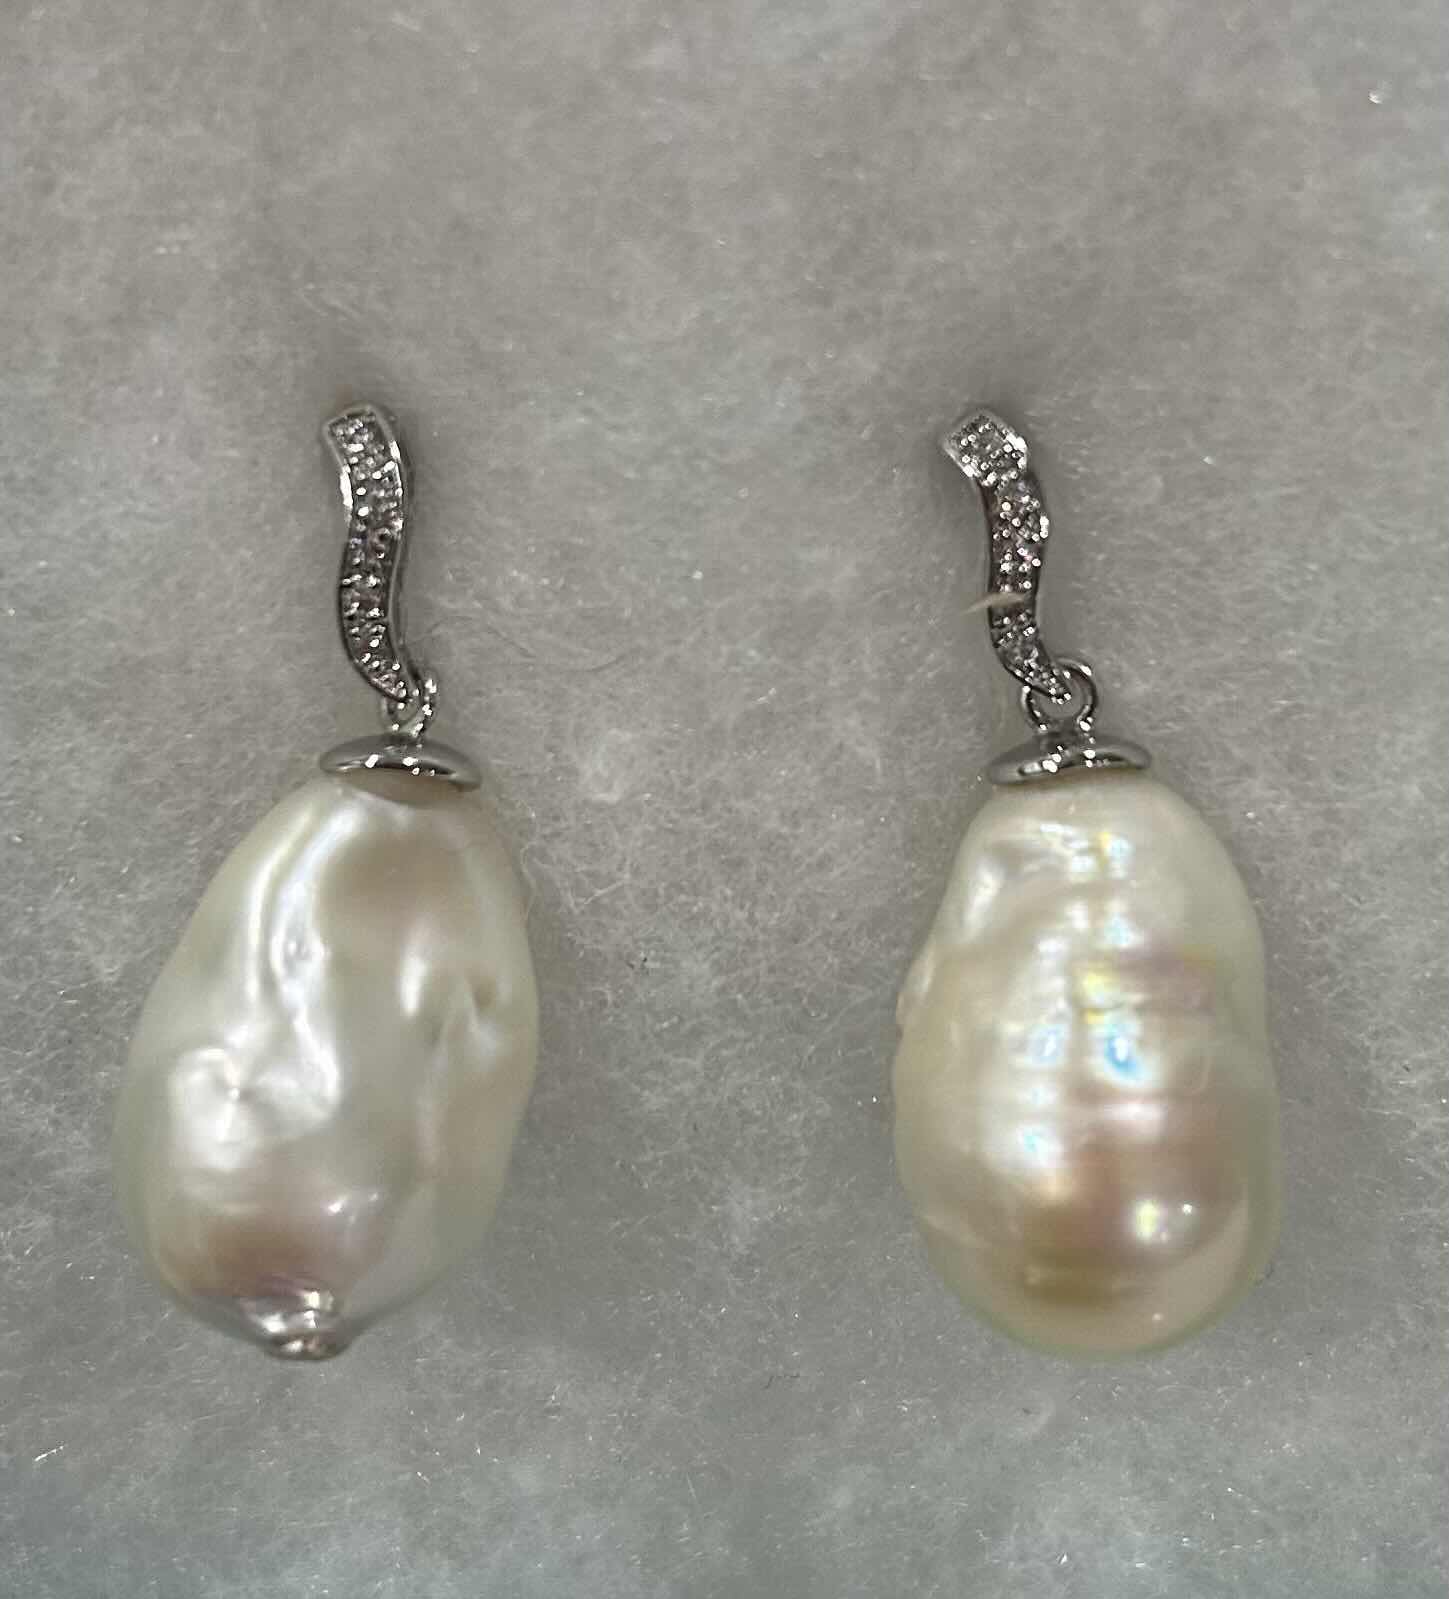 Photo 1 of .925 EARRINGS WITH PEARLS (PEARLS NOT AUTHENTICATED)